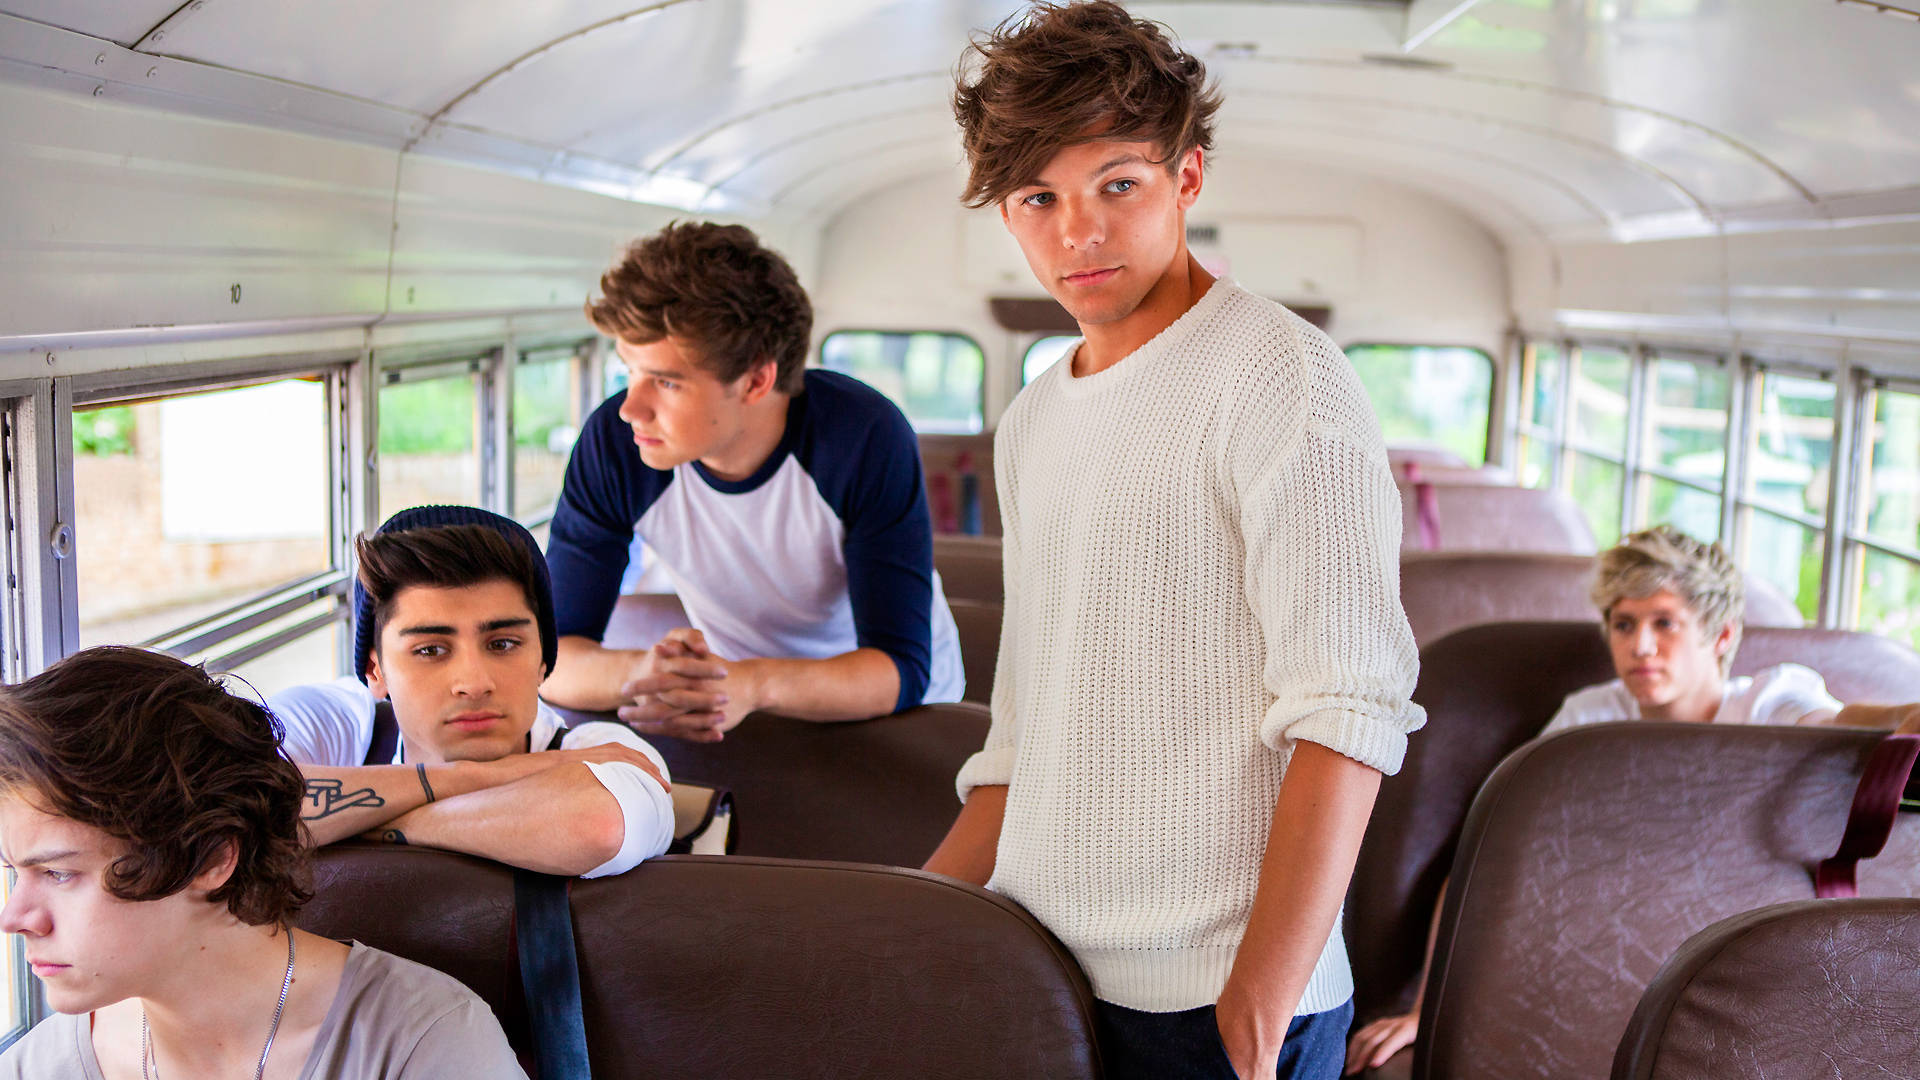 "One Direction enjoying a much-deserved break on their tour bus!" Wallpaper